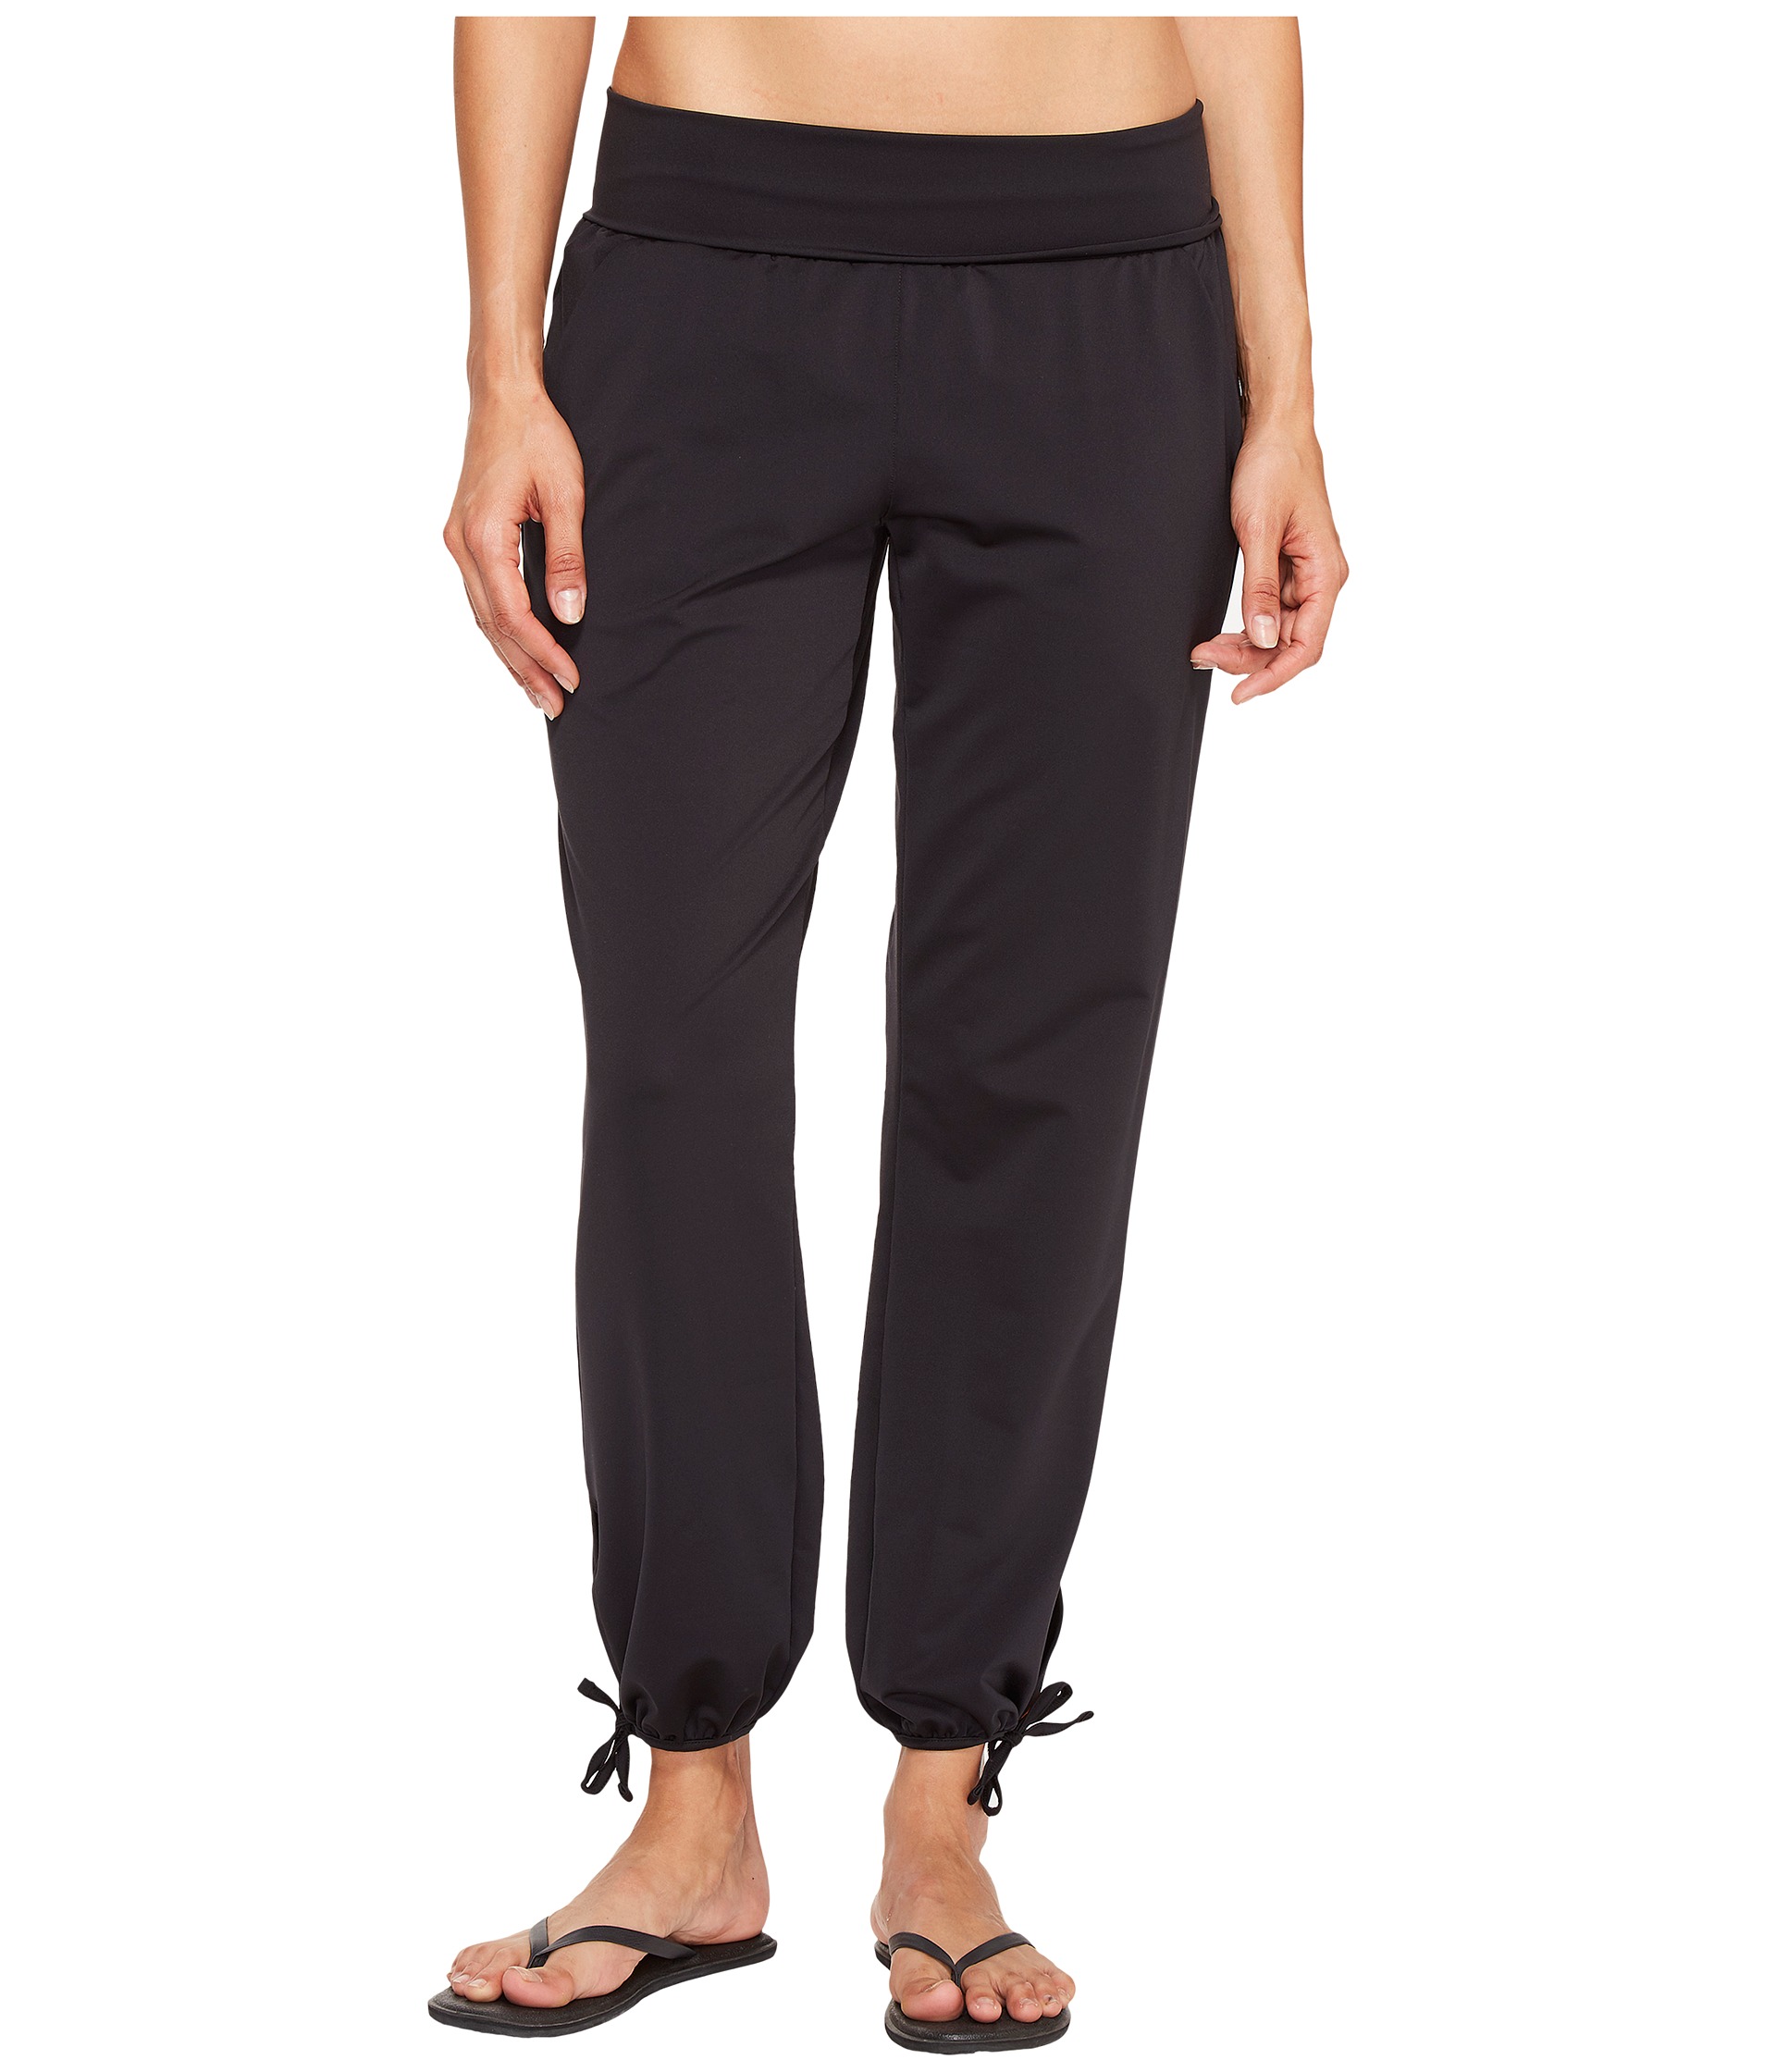 Lucy Yoga Flow Pants at Zappos.com